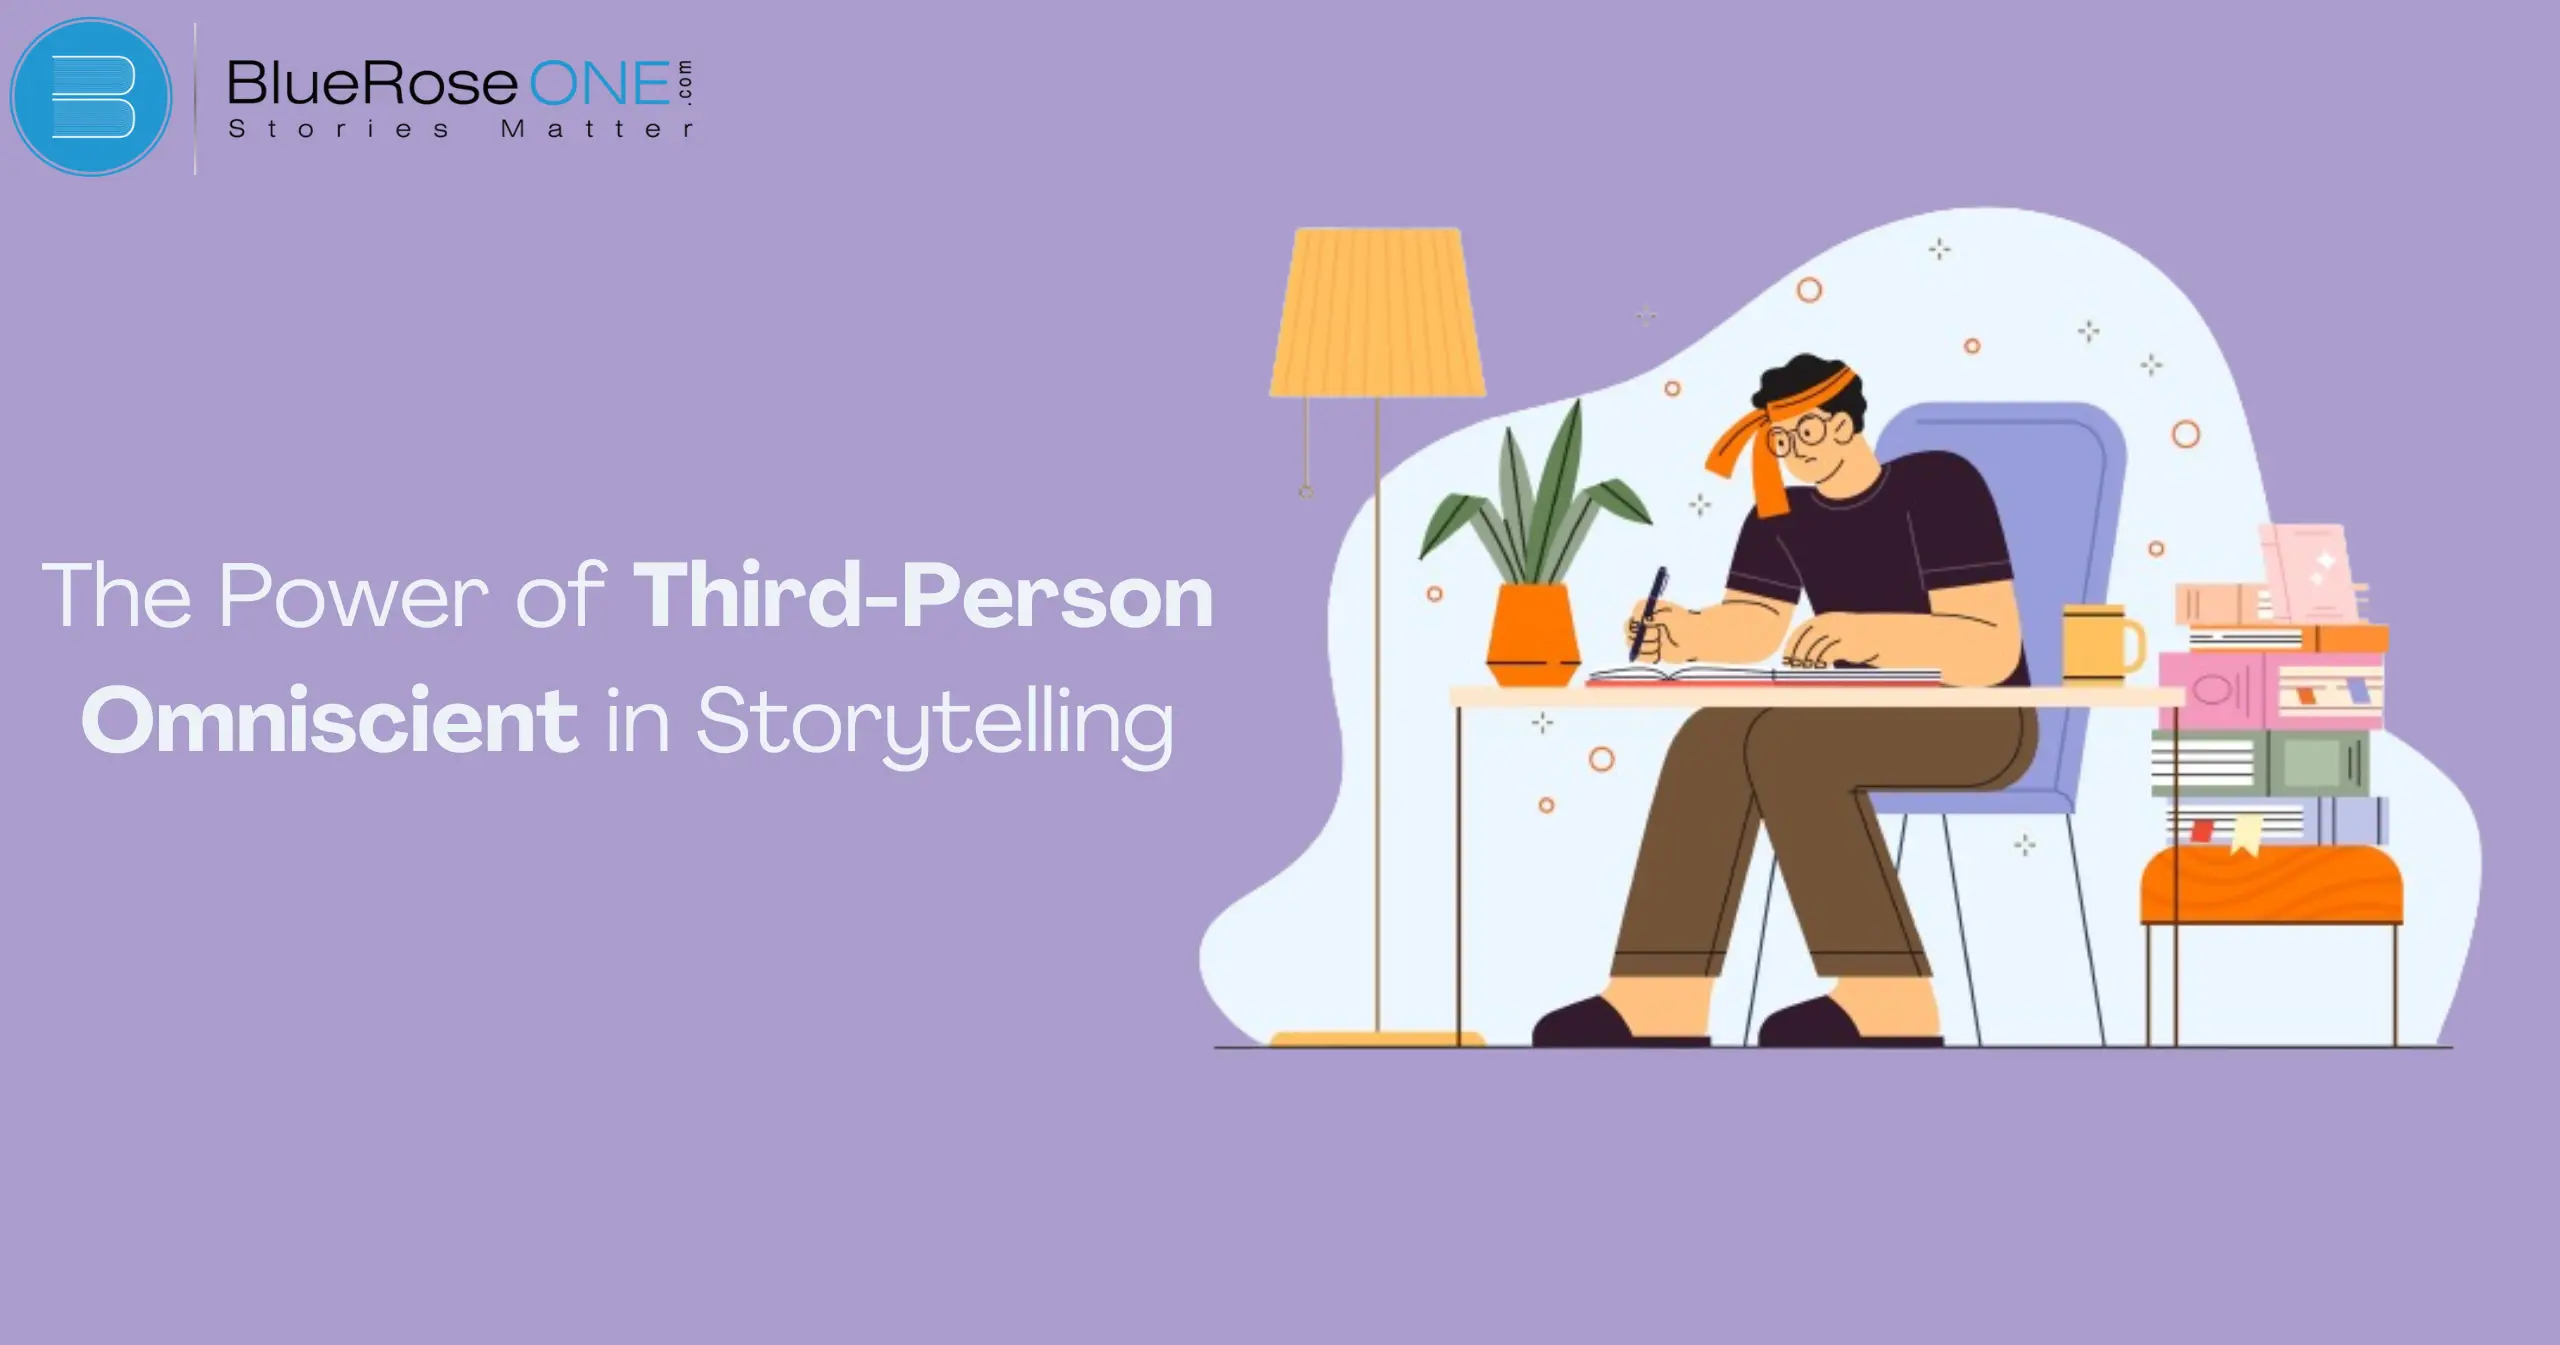 The Power of Third-Person Omniscient in Storytelling